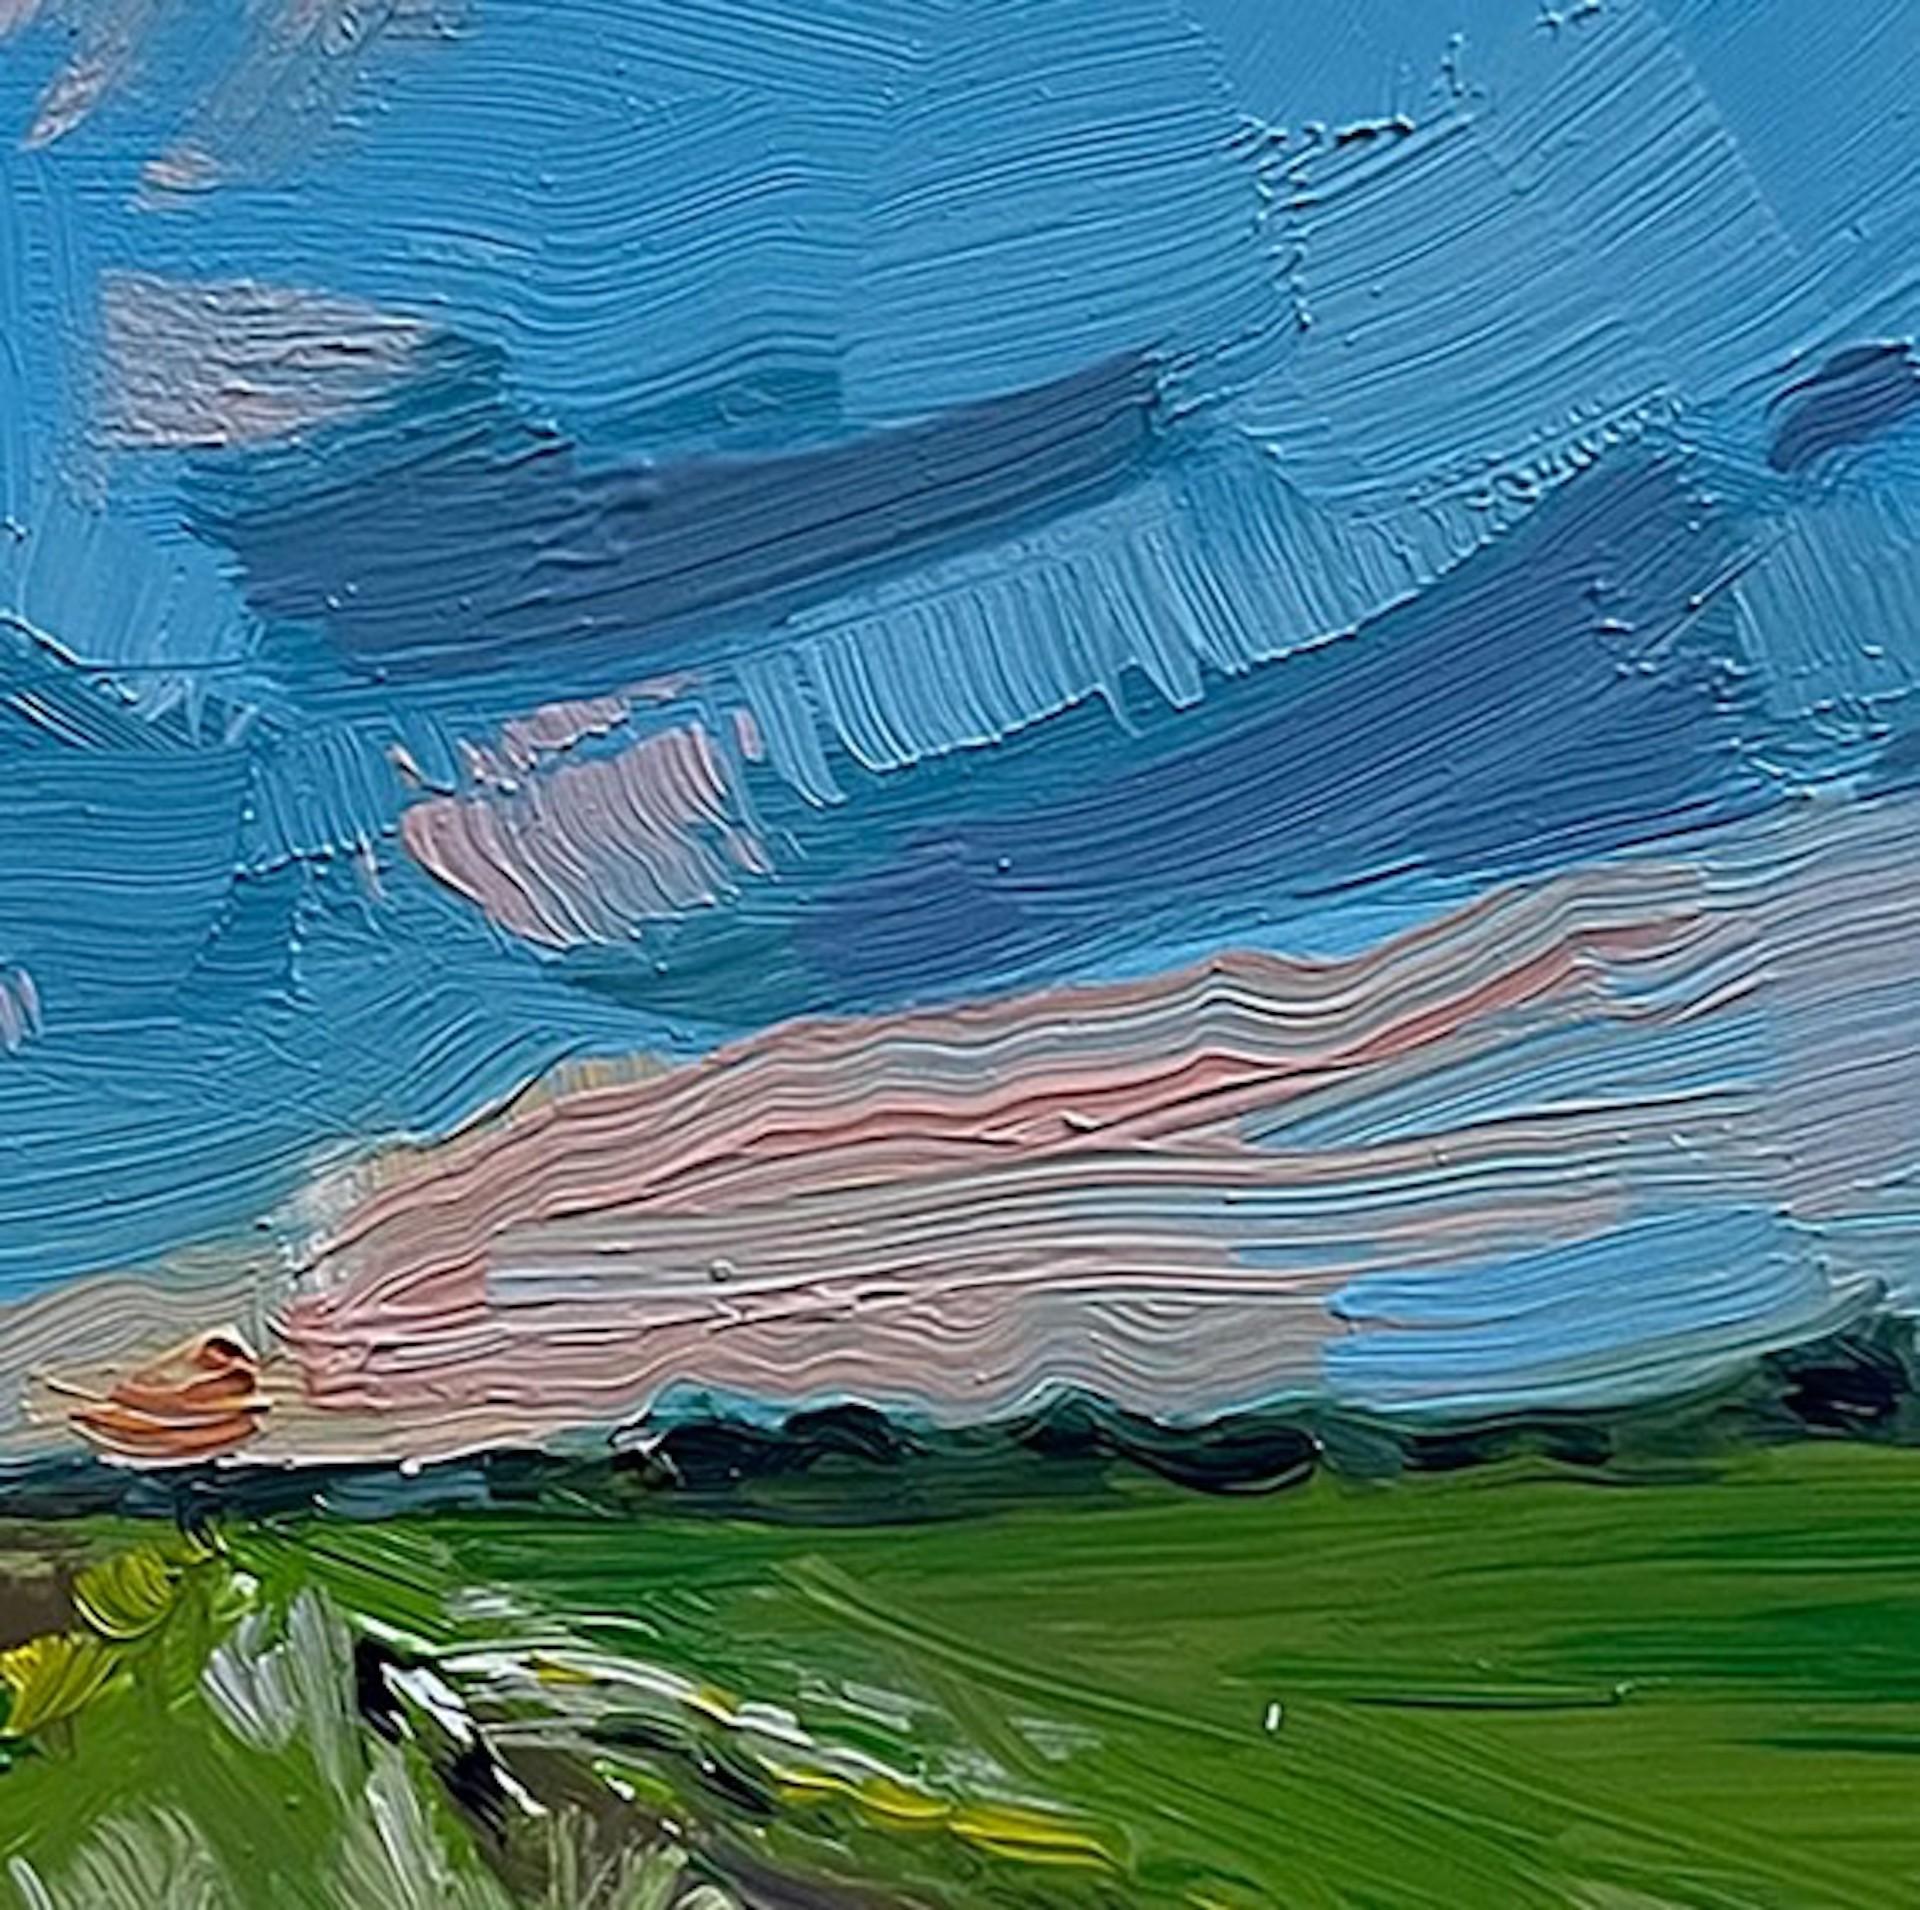 May Hill [May 2021]
Original
Landscape
Oil Painting on Gesso Board
Complete Size of Unframed Work: H:15.2 cm x W:15.2 cm x D:2cm
Sold Unframed
Please note that insitu images are purely an indication of how a piece may look

May Hill is an Original